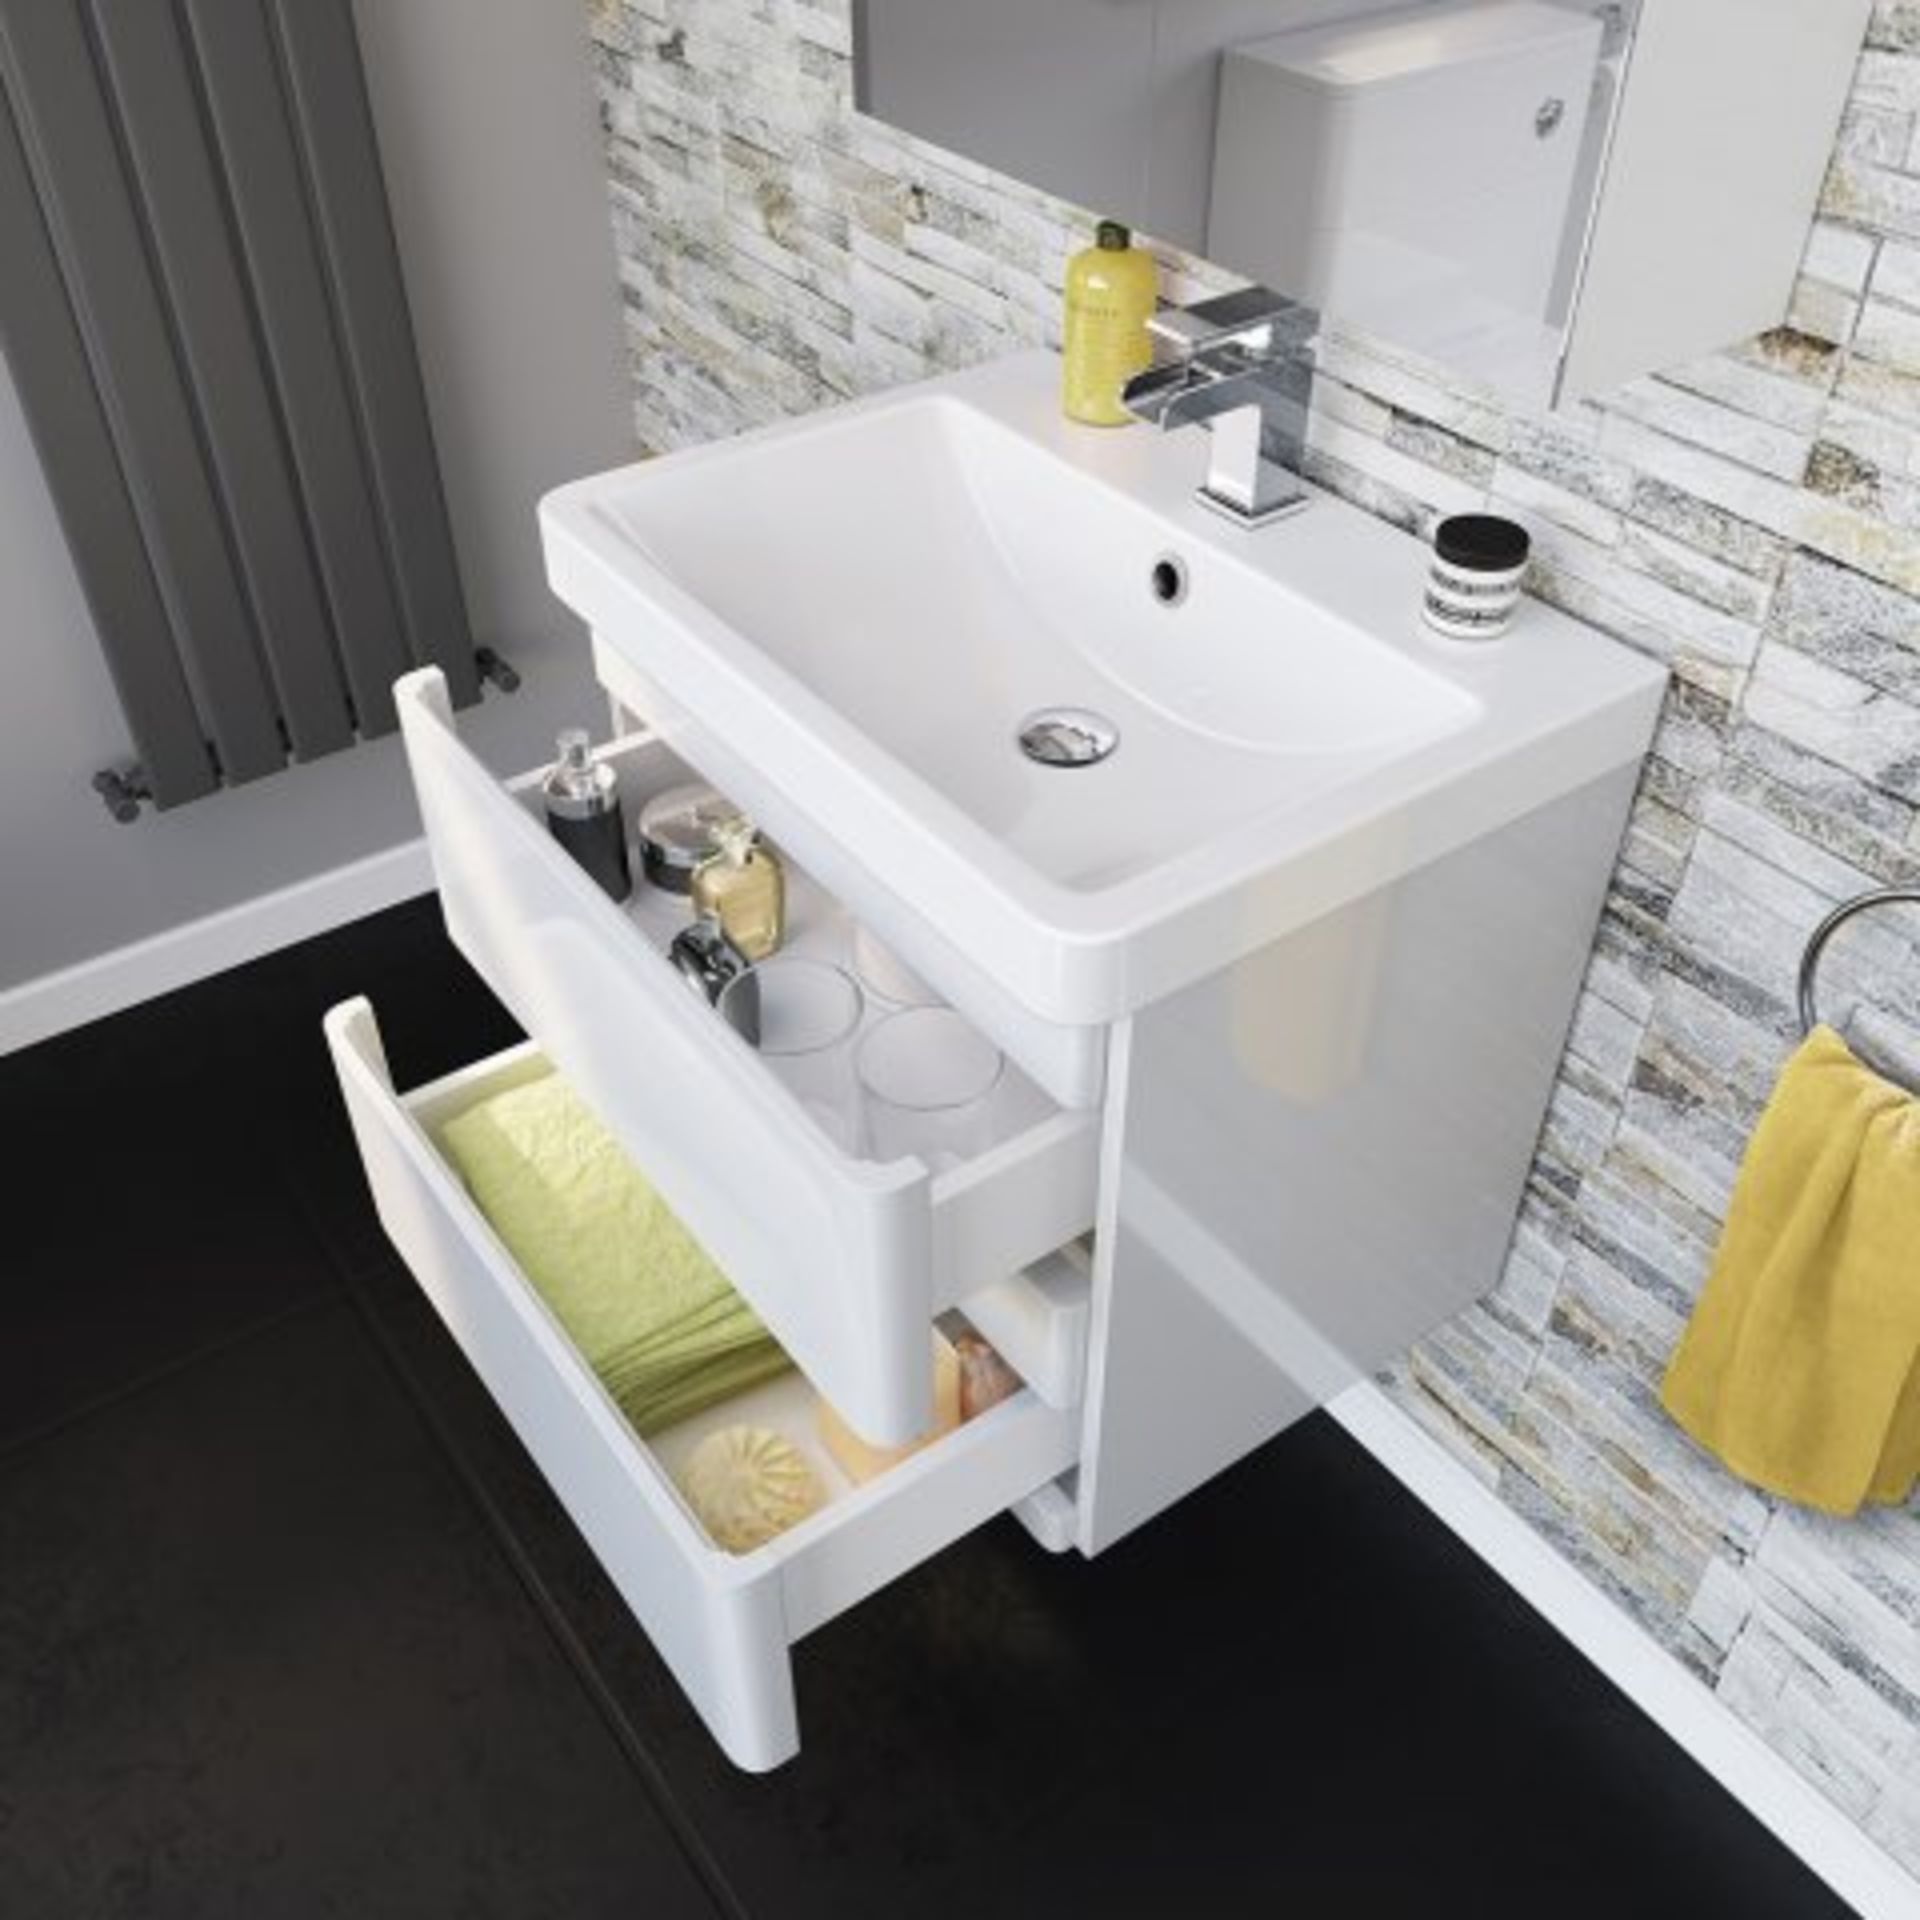 NEW & BOXED 600mm Denver II Gloss White Built In Basin Drawer Unit - Wall Hung. RRP £849.99.M... - Image 3 of 3